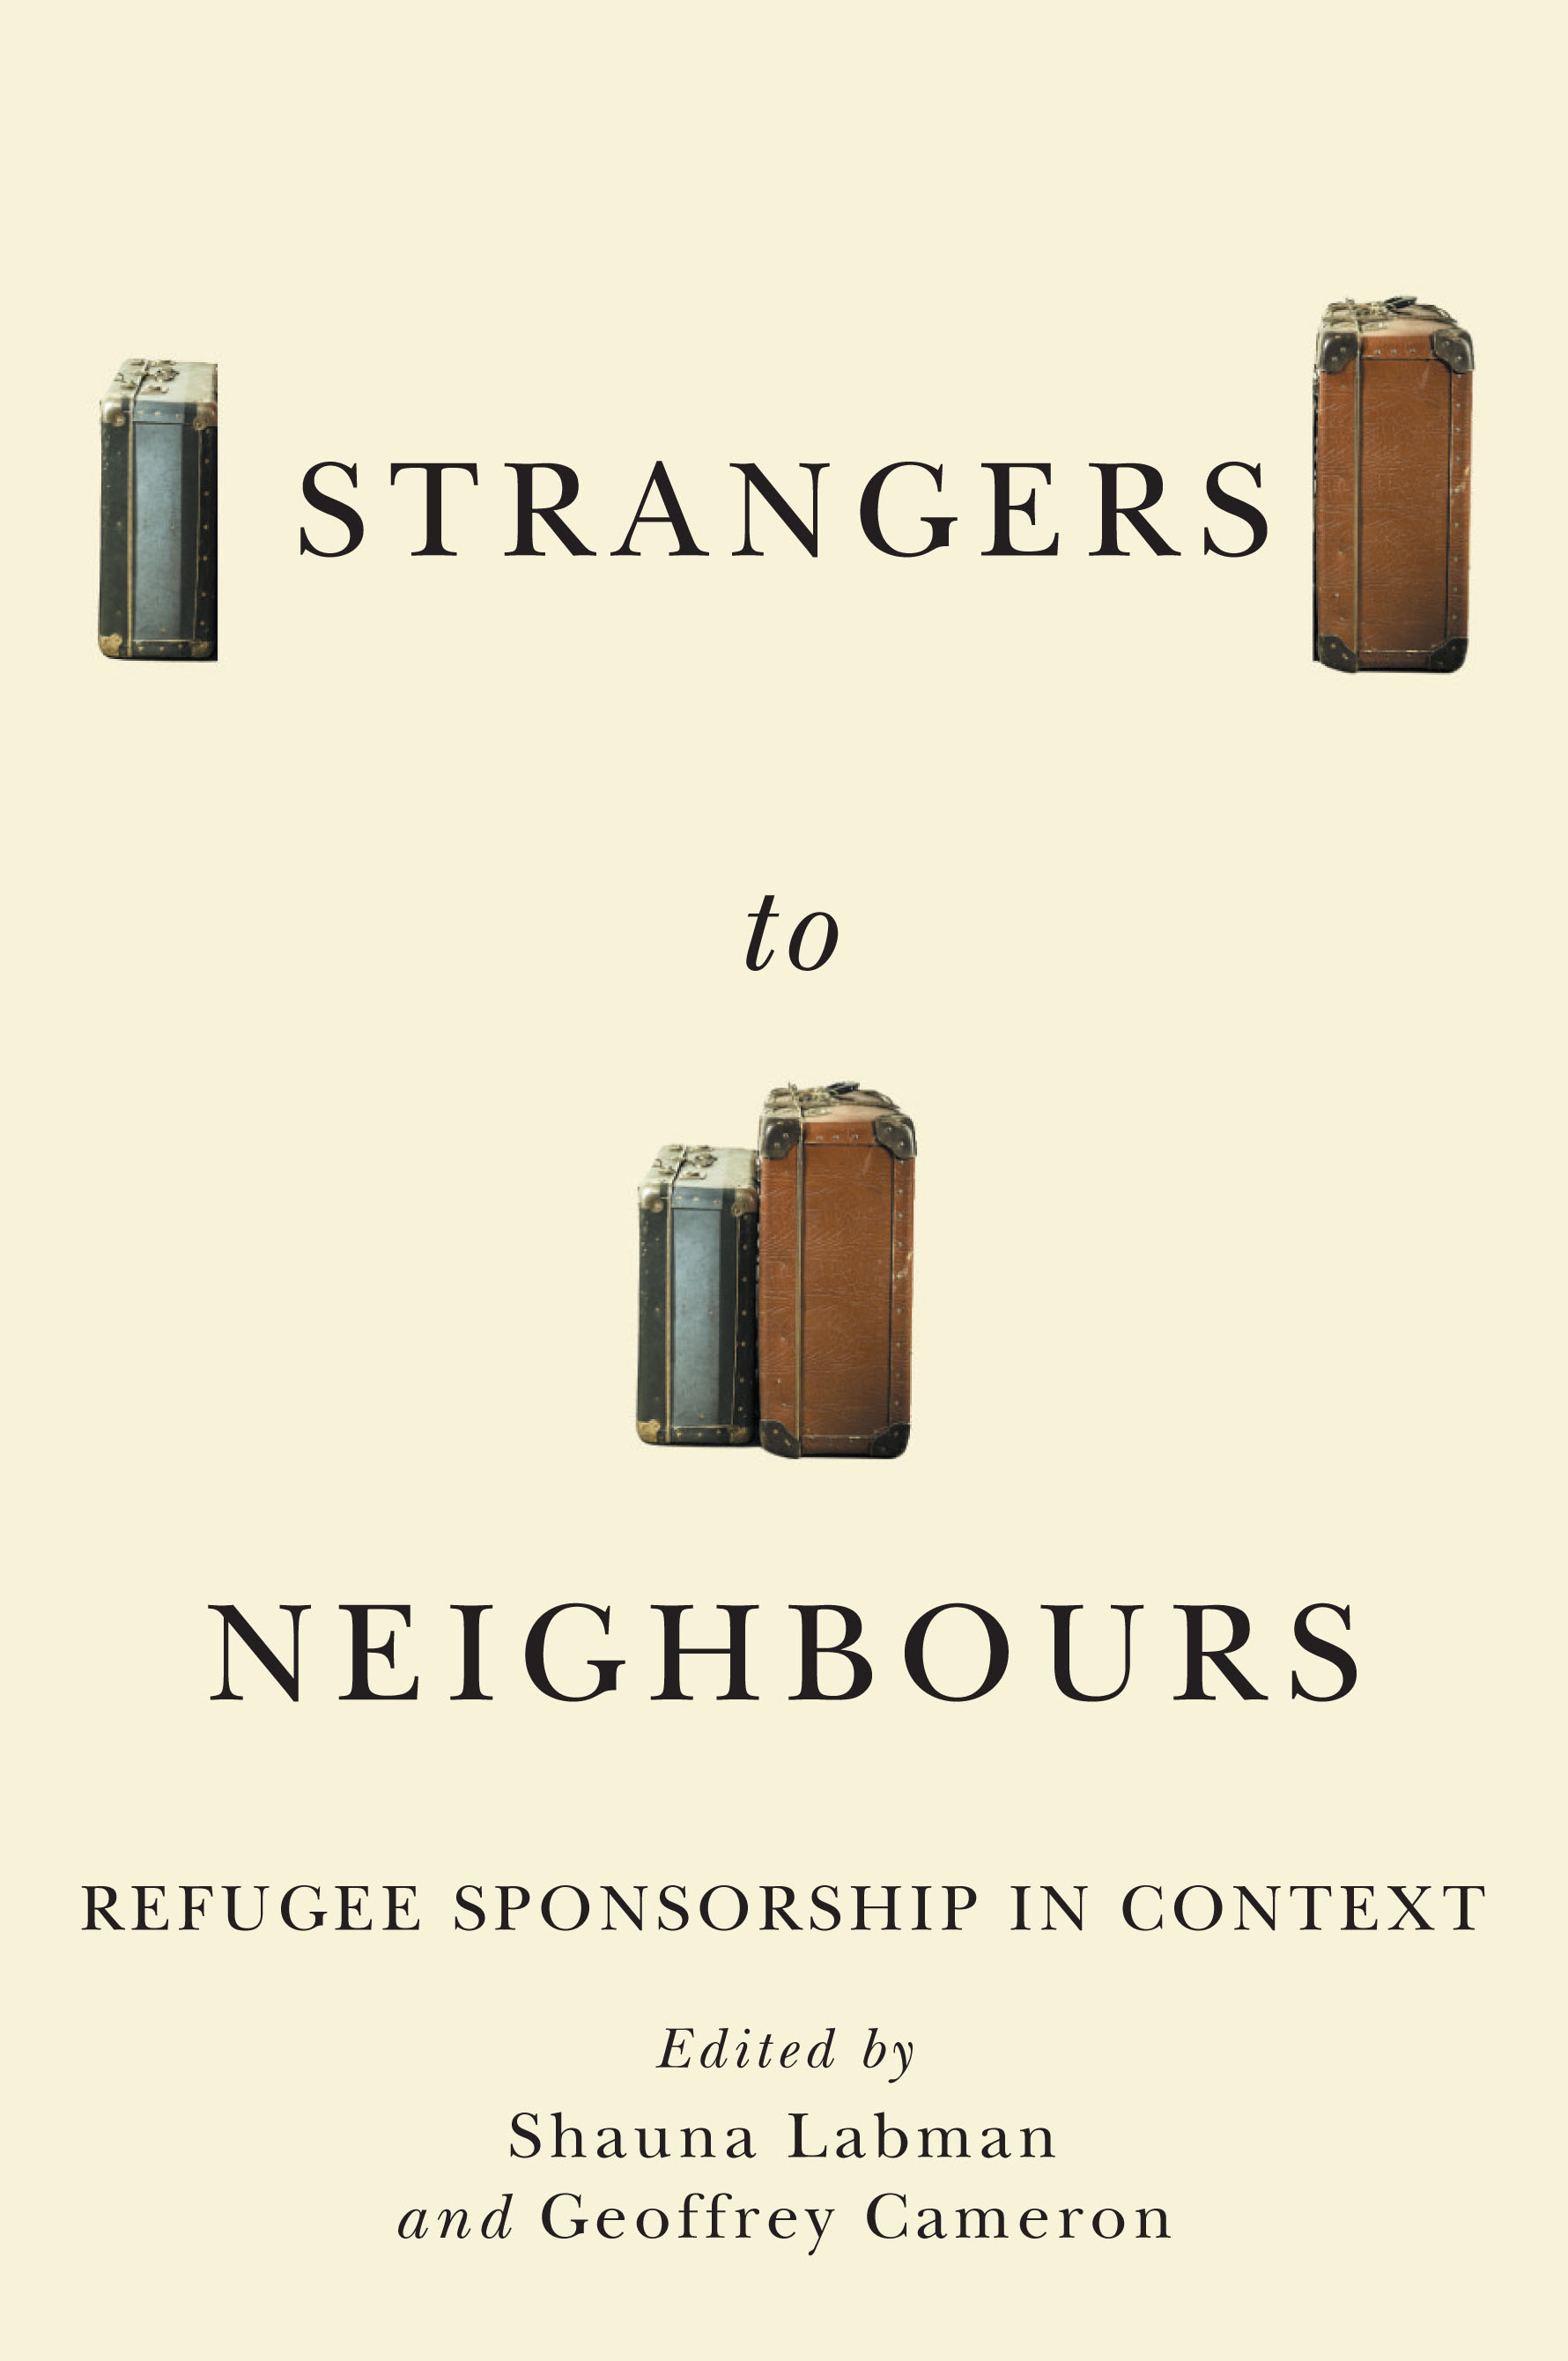 Strangers to neighbours book cover page depicting suitcases